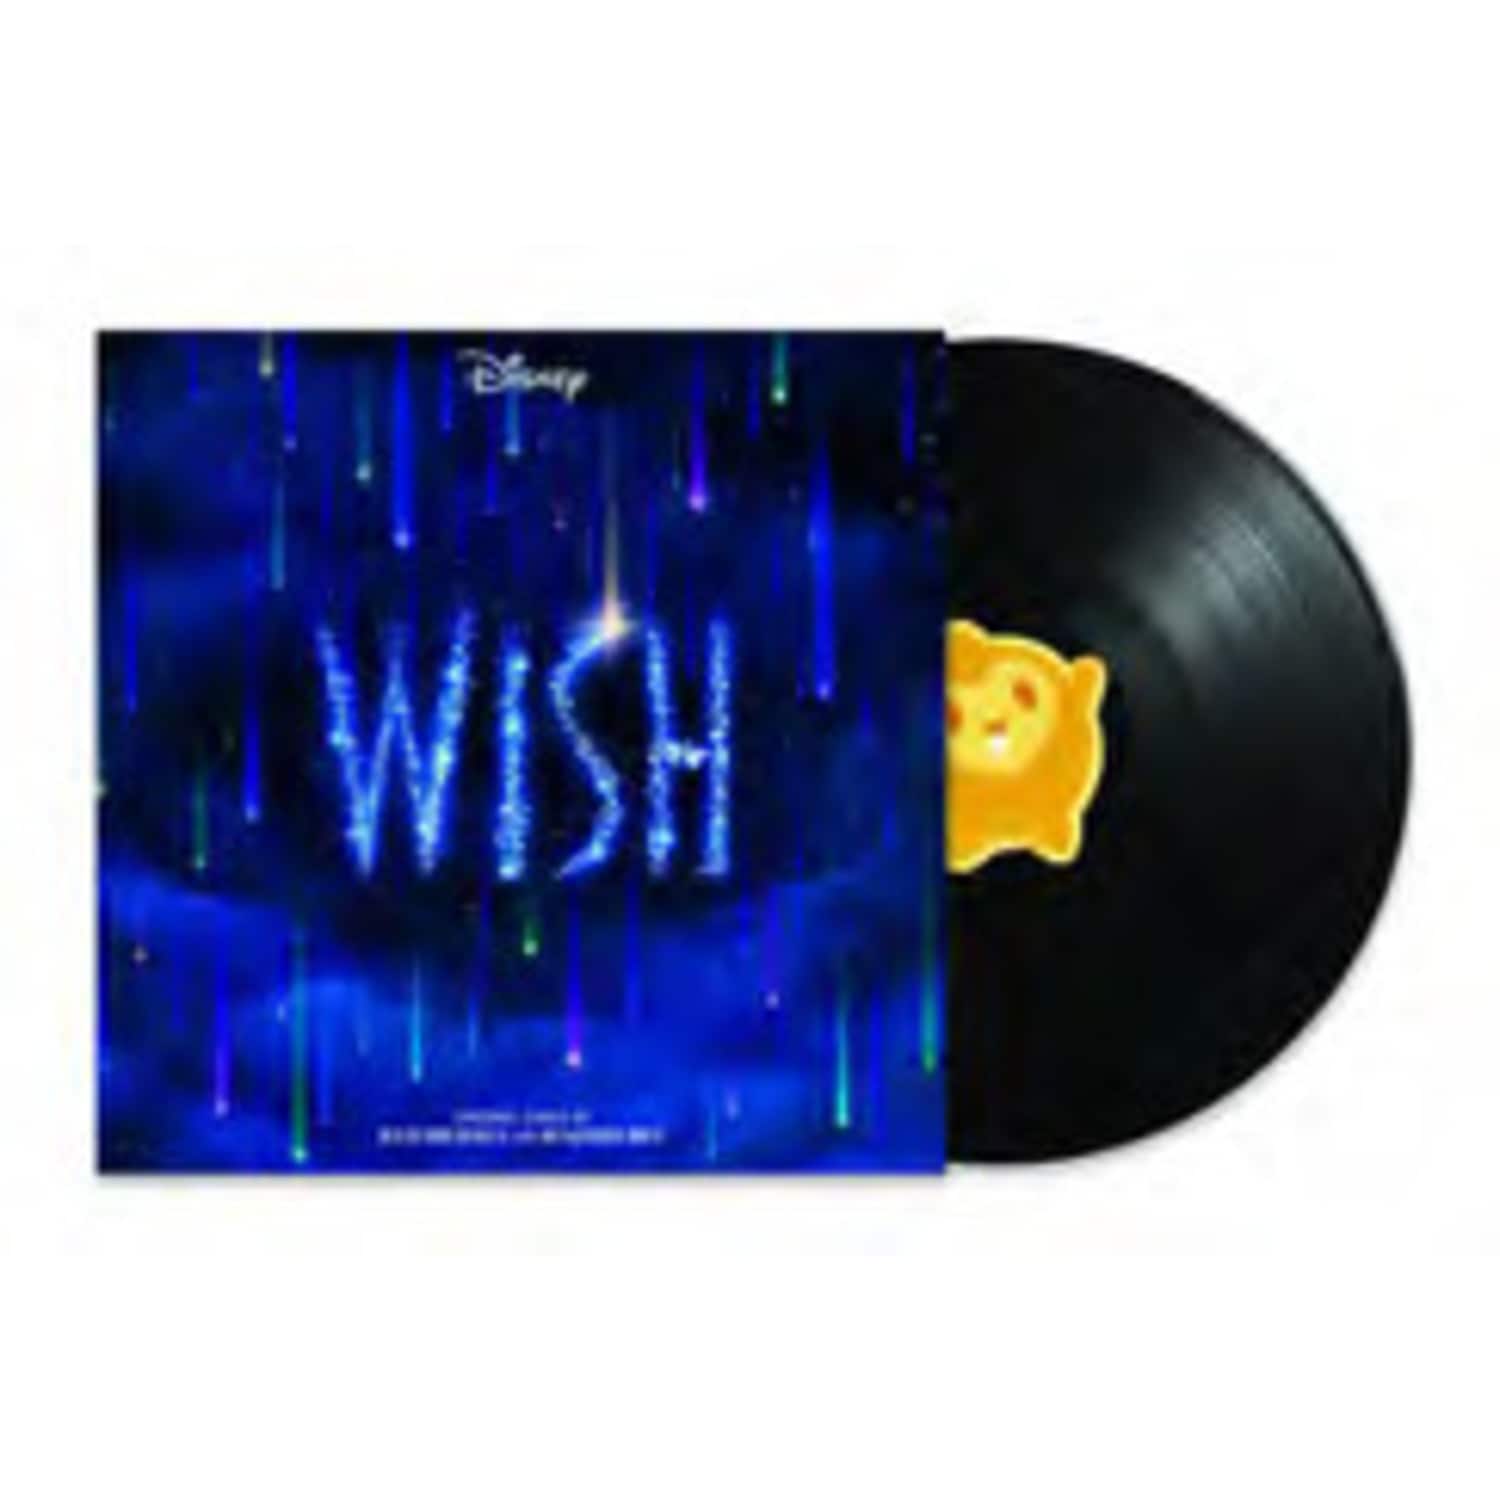 Ost / Various Artists - WISH - THE SONGS 